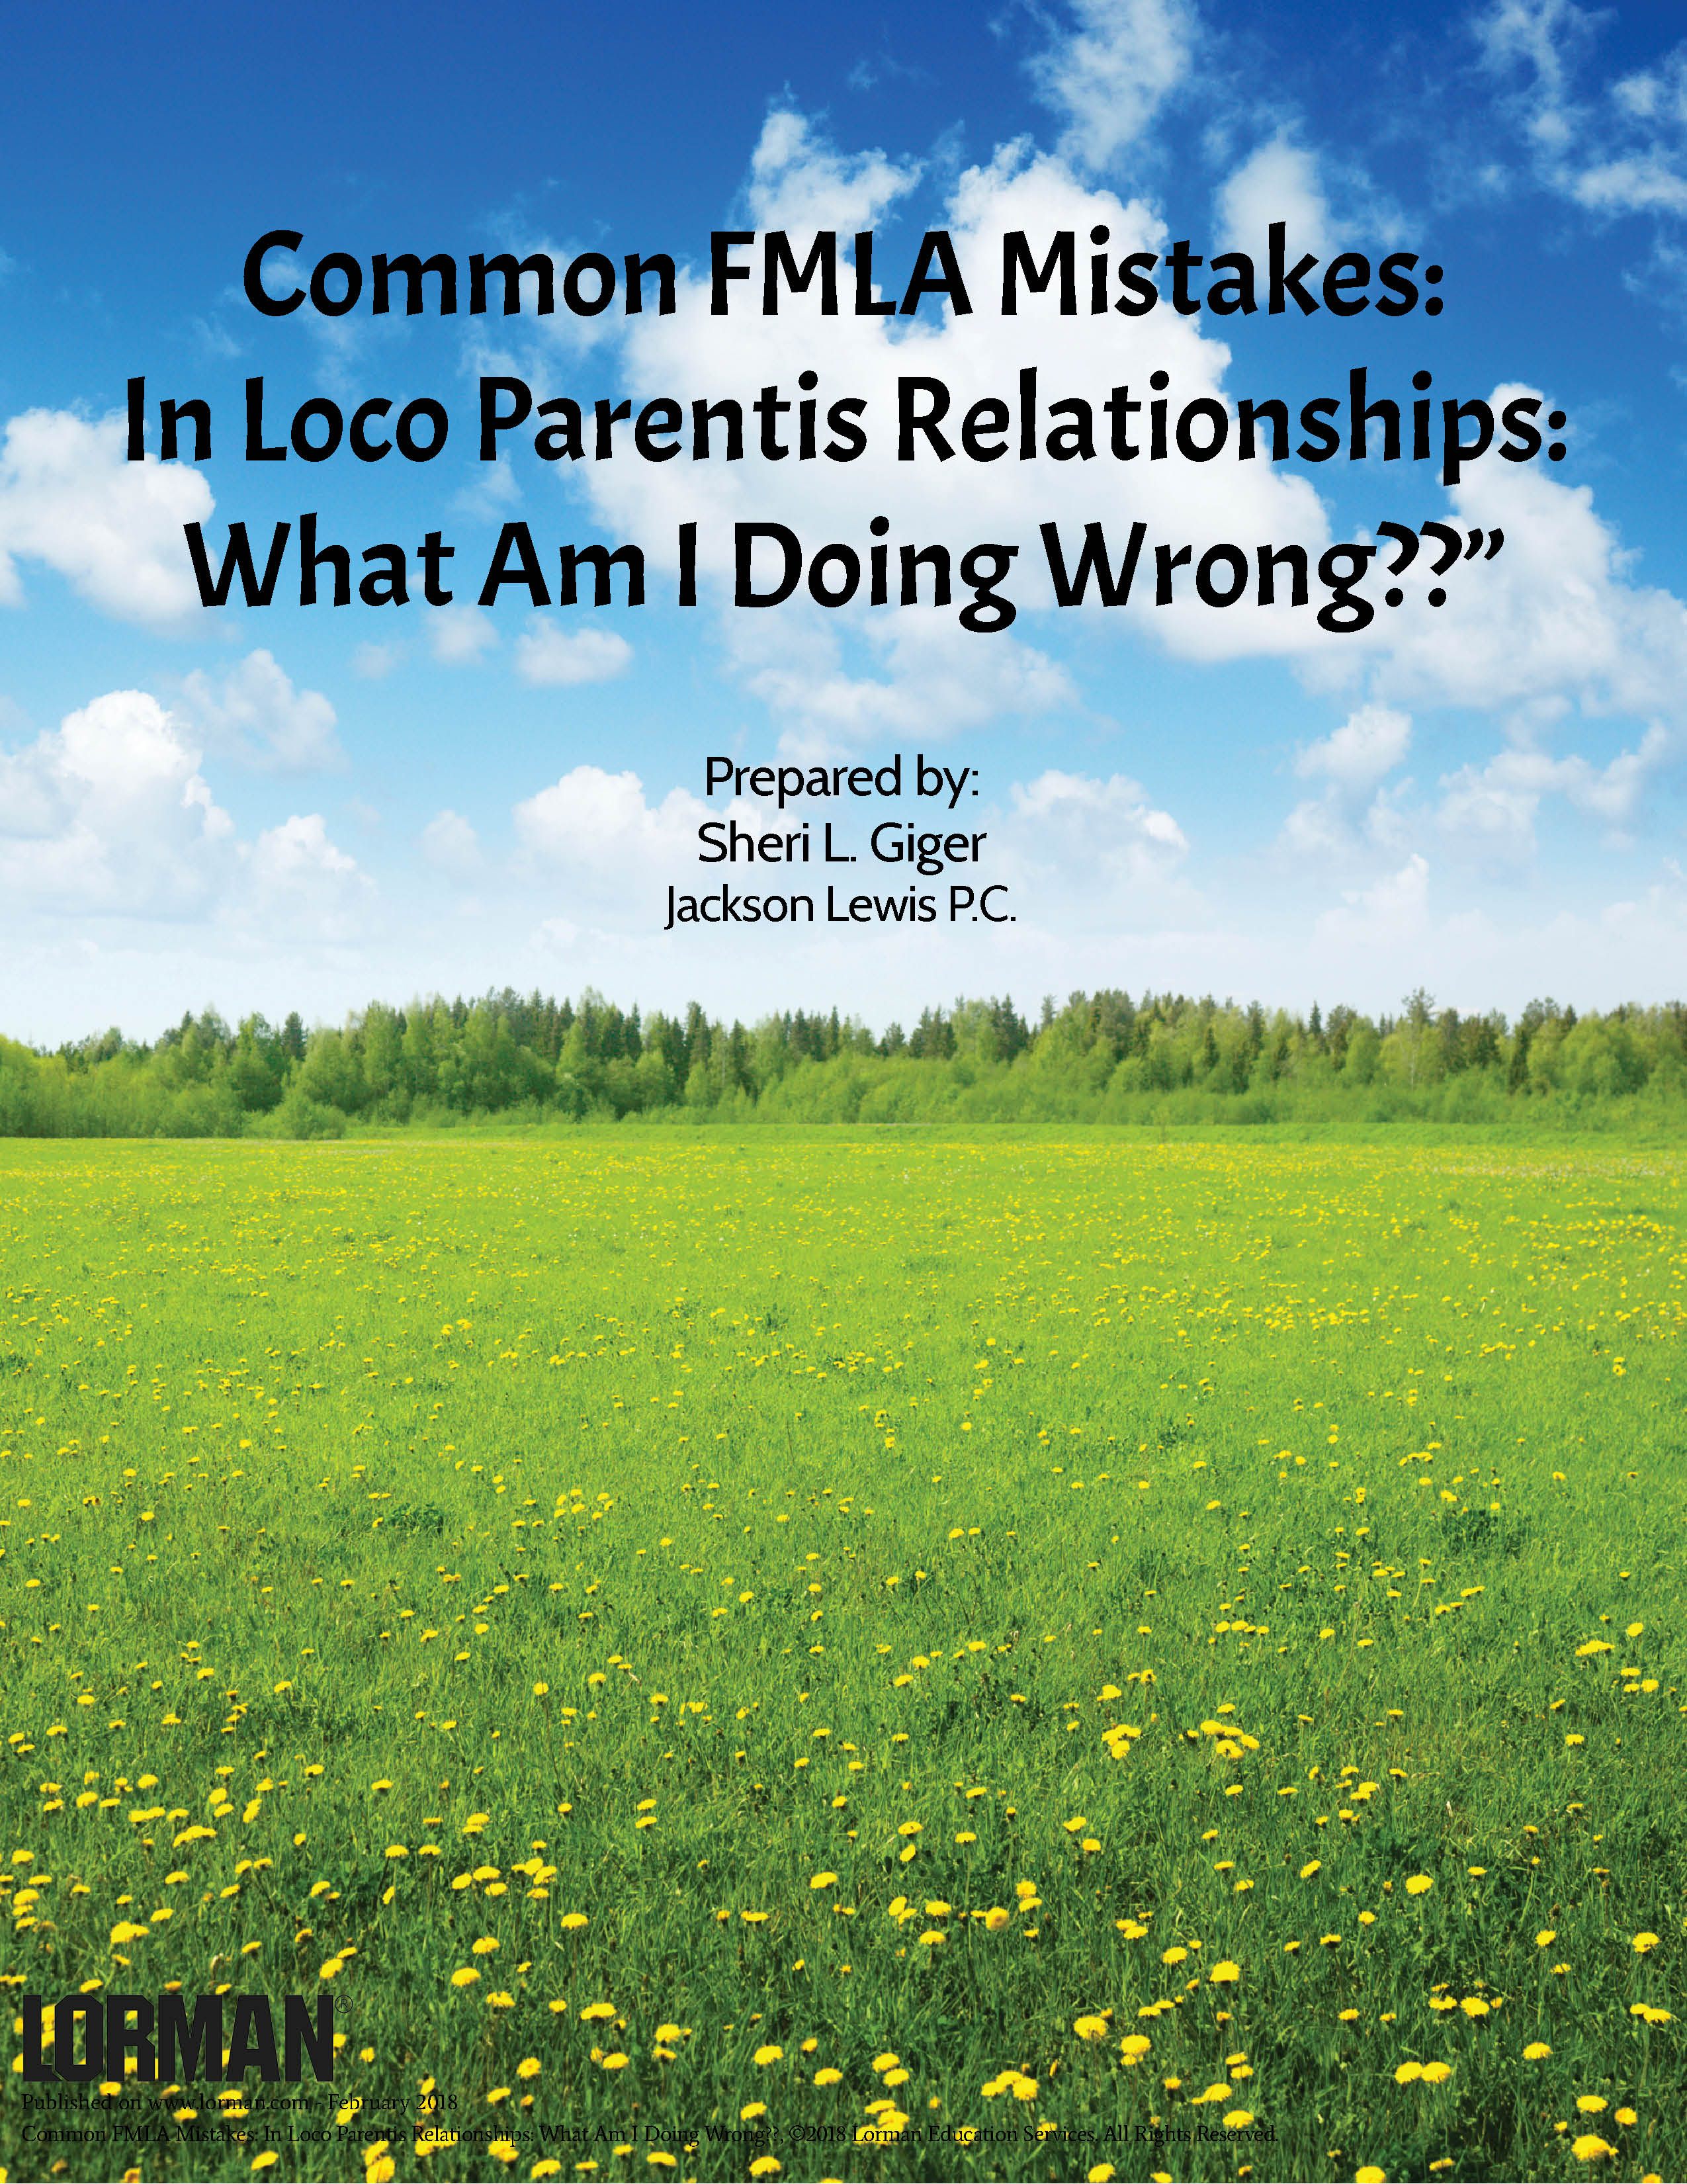 Common FMLA Mistakes: In Loco Parentis Relationships: What Am I Doing Wrong??